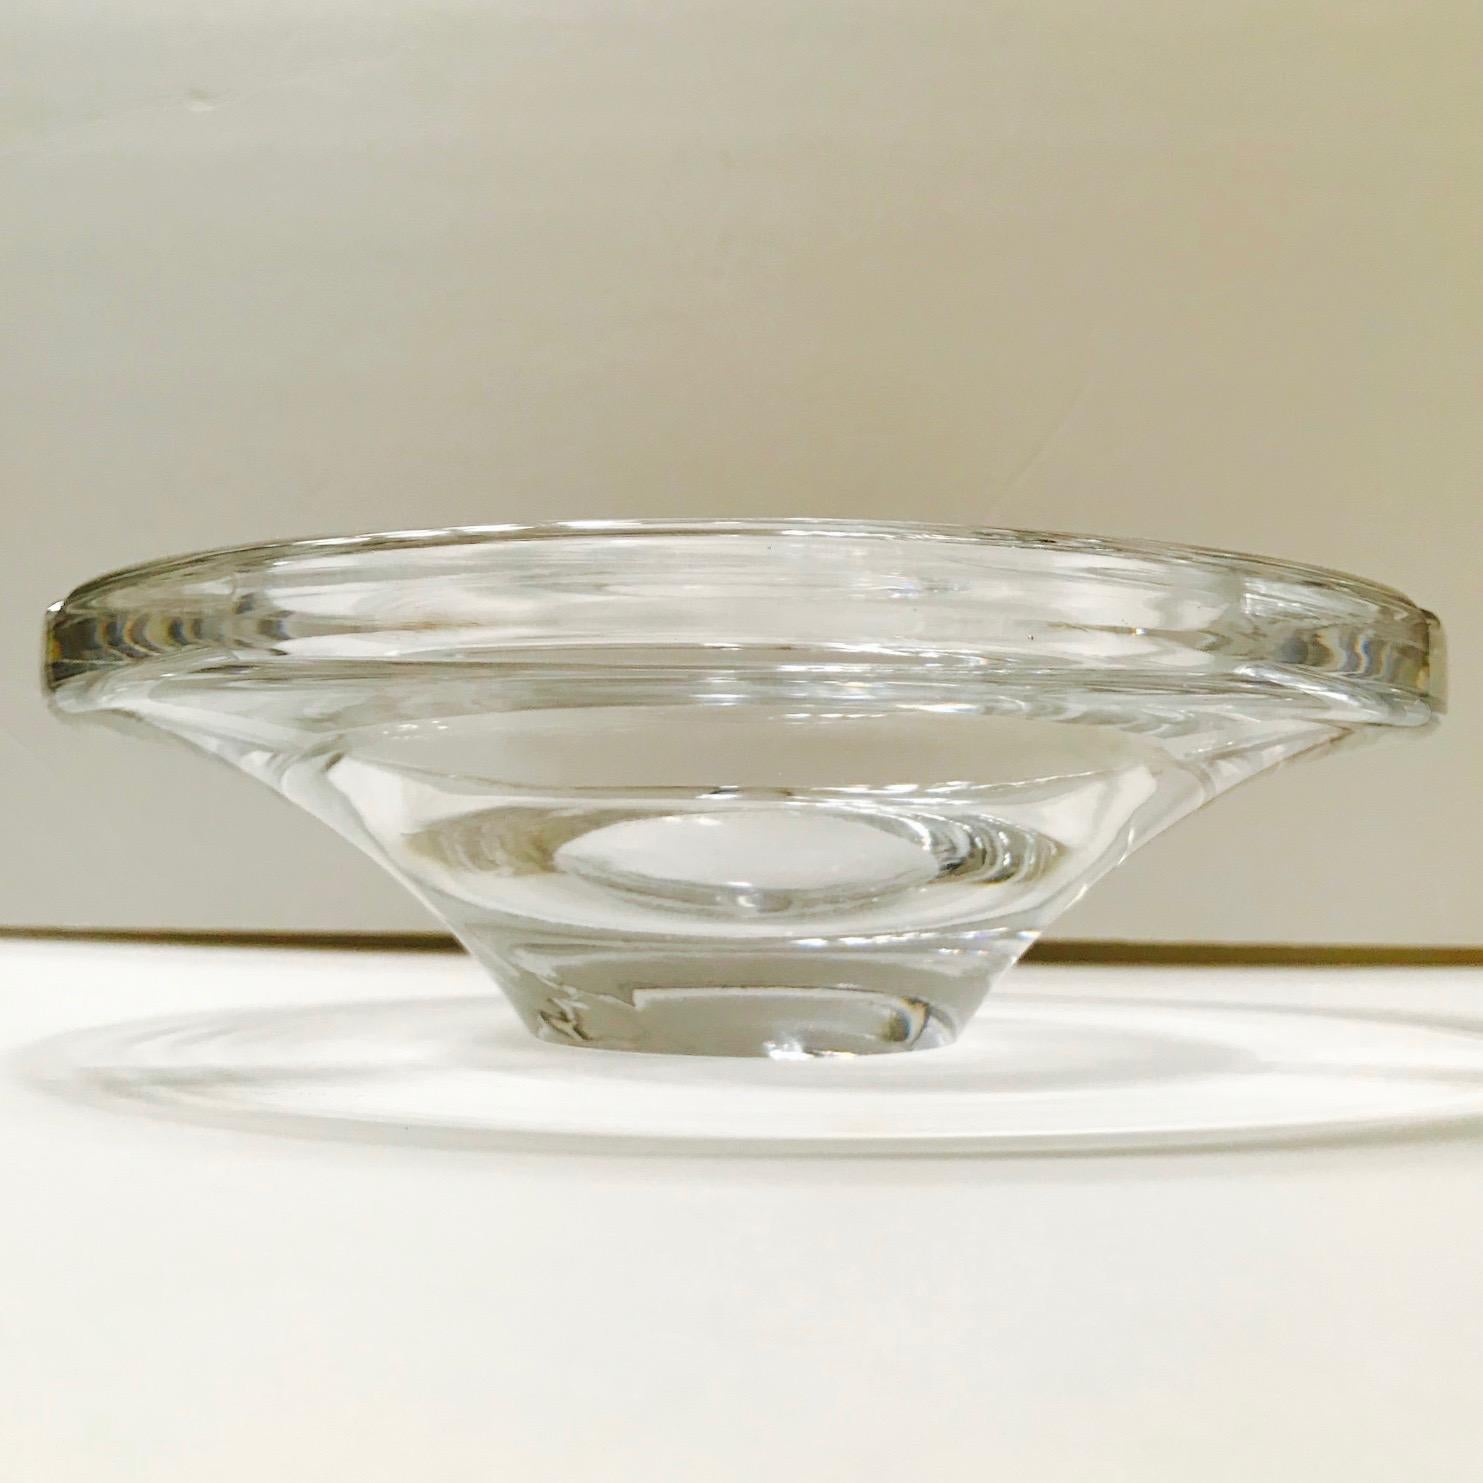 Mid-20th Century Mid-Century Modern Crystal Ashtray by Lindstrand for Kosta Boda, Sweden, 1960s